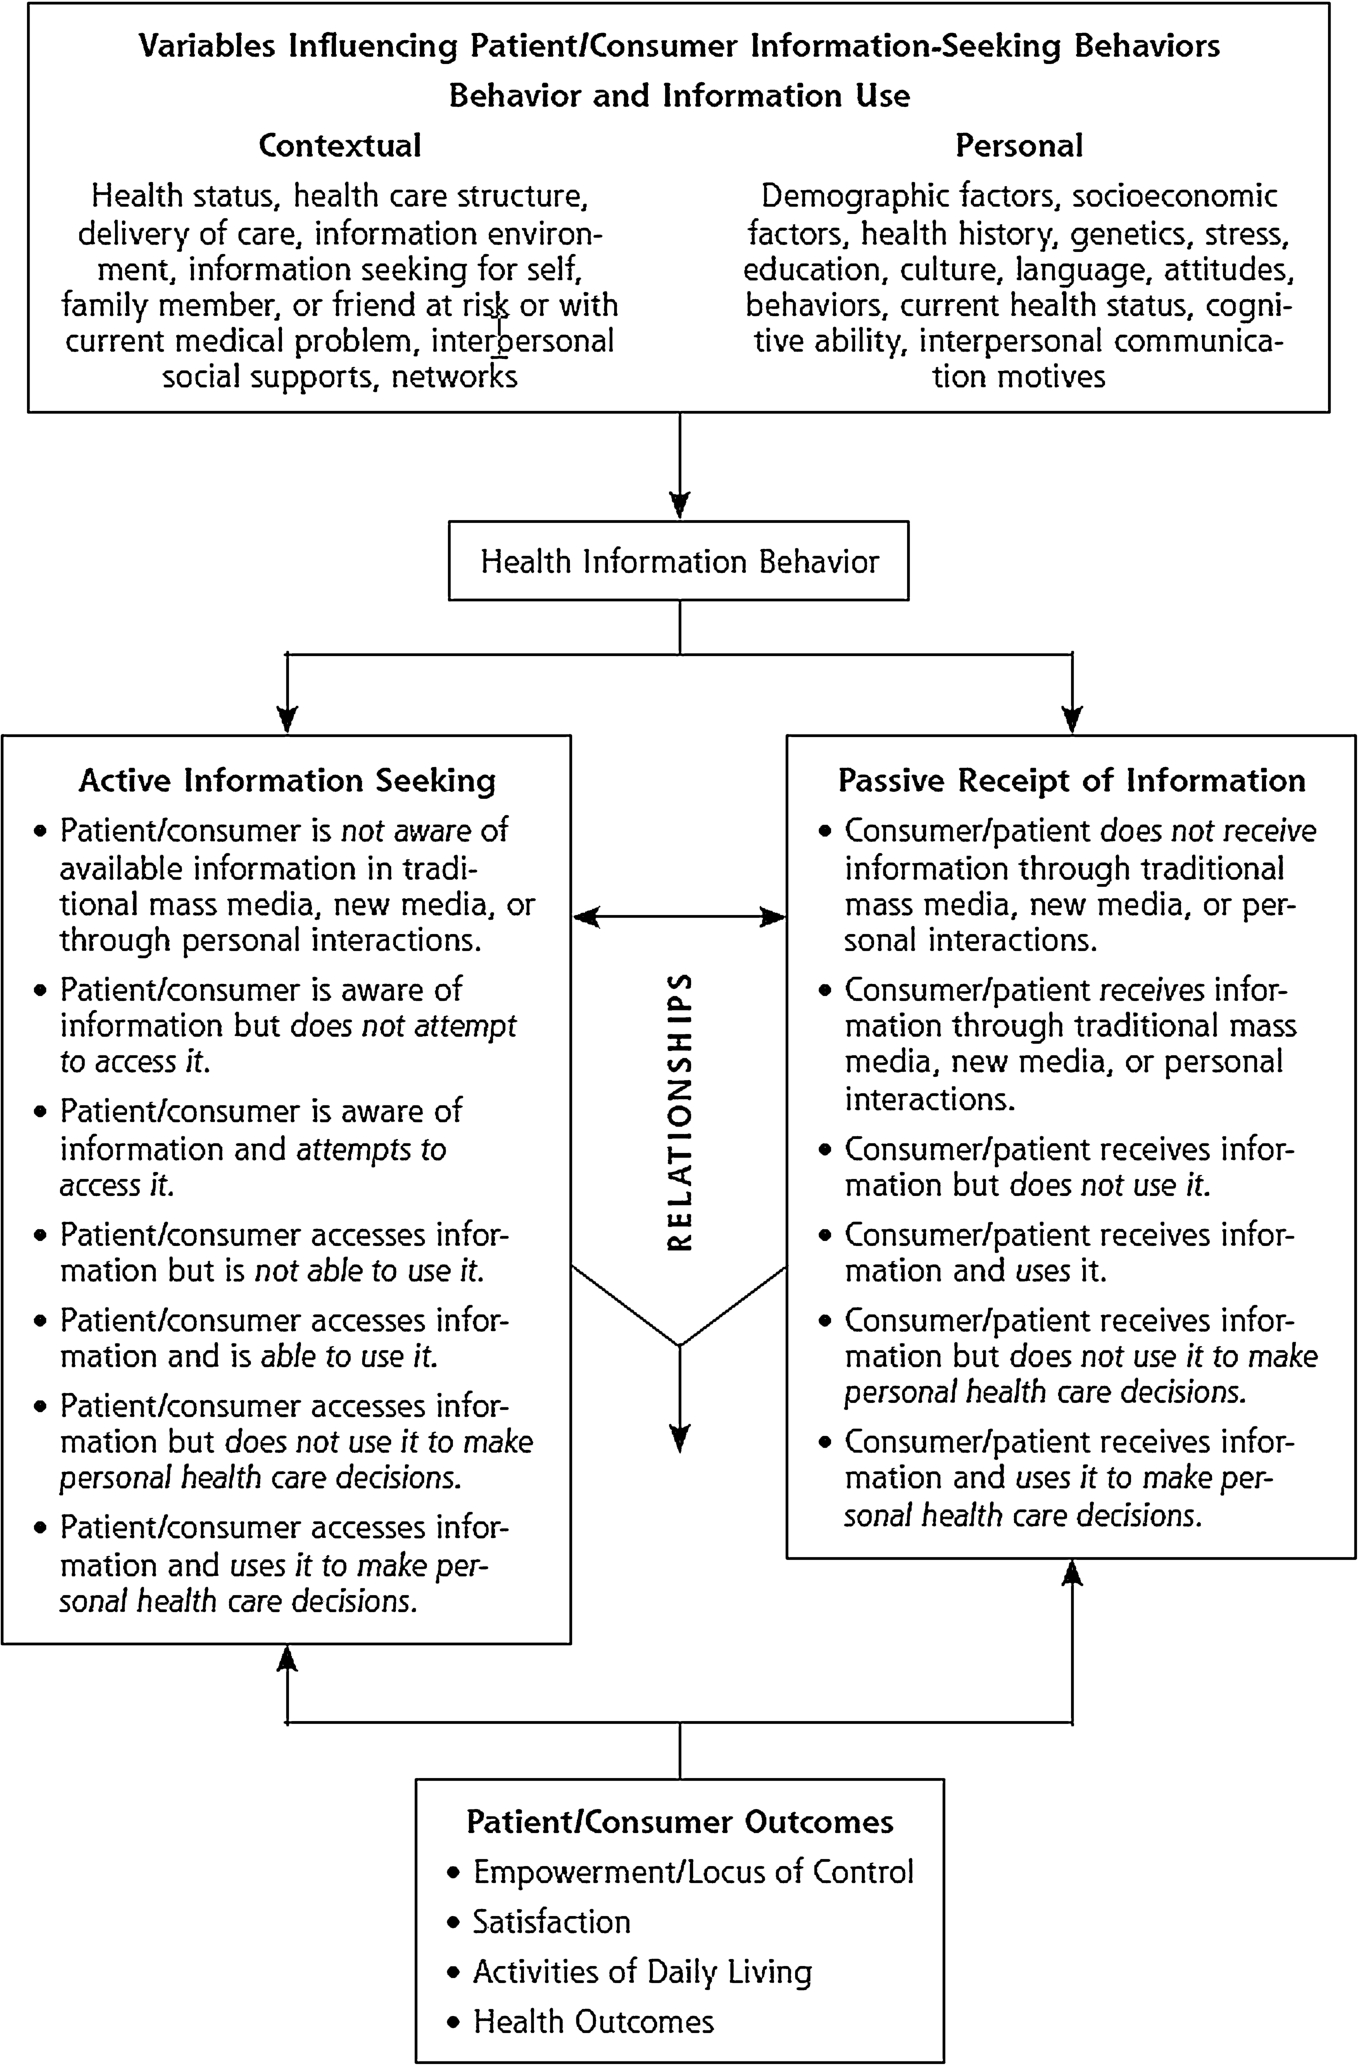 A Model to Describe Patient’s Health Information Seeking Behaviors (Reproduced with permission from Health Information Seeking, Receipt, and Use in Diabetes Self-Management, July/August, 2010, Vol 8, No 4, issue of Annals of Family Medicine Copyright©2010 American Academy of Family Physicians. All Rights Reserved.)